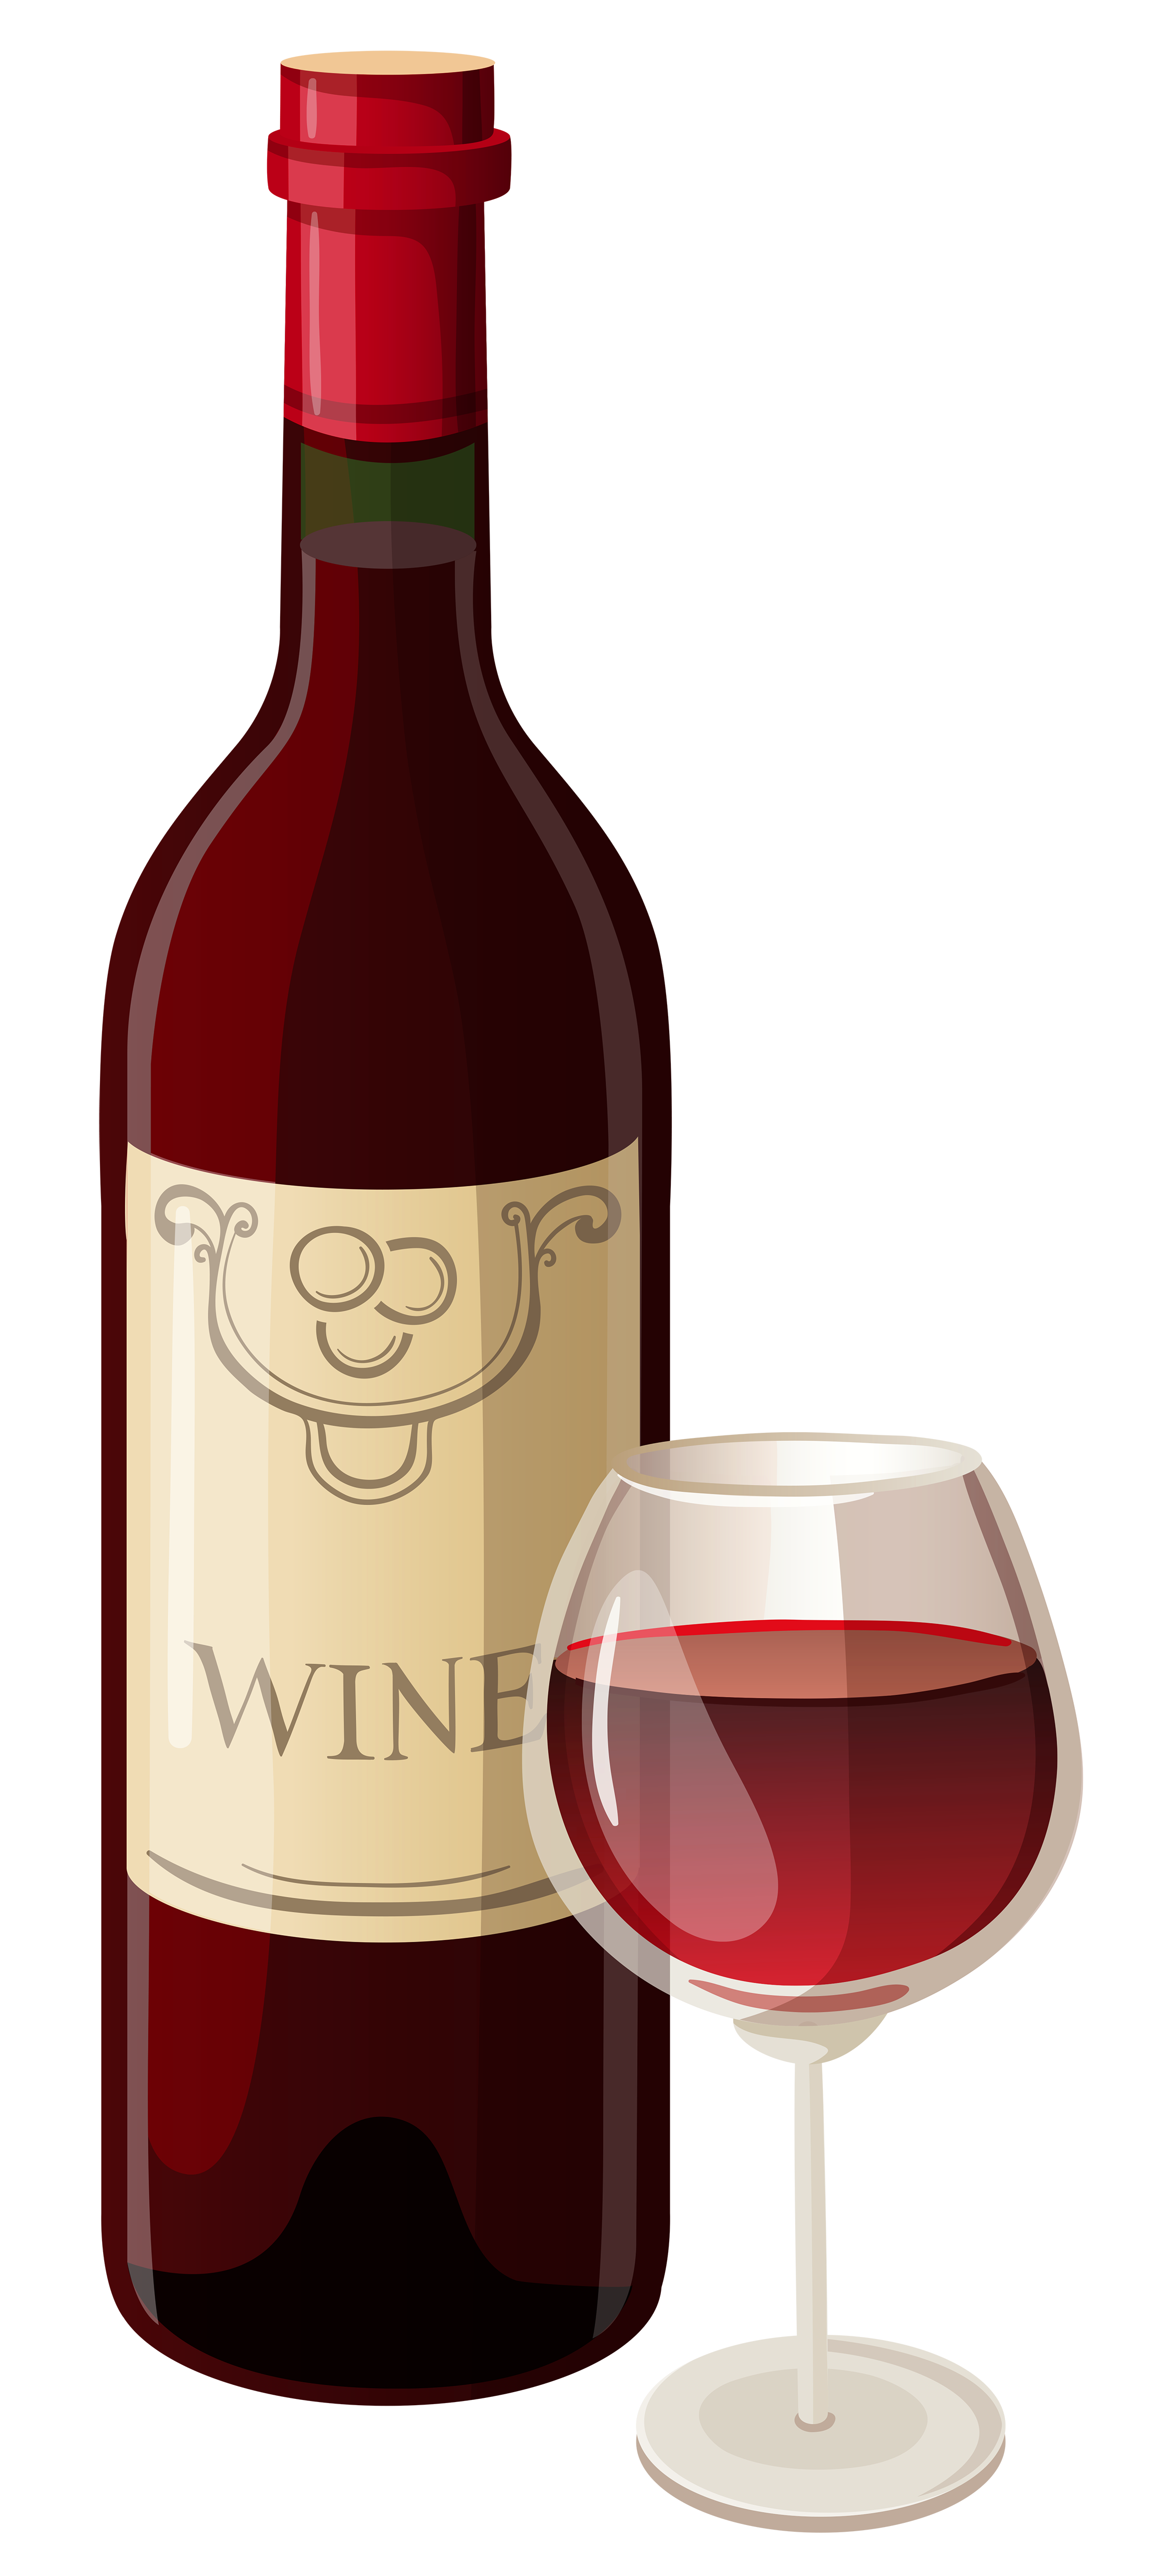 Wine bottle and glass vector clipart